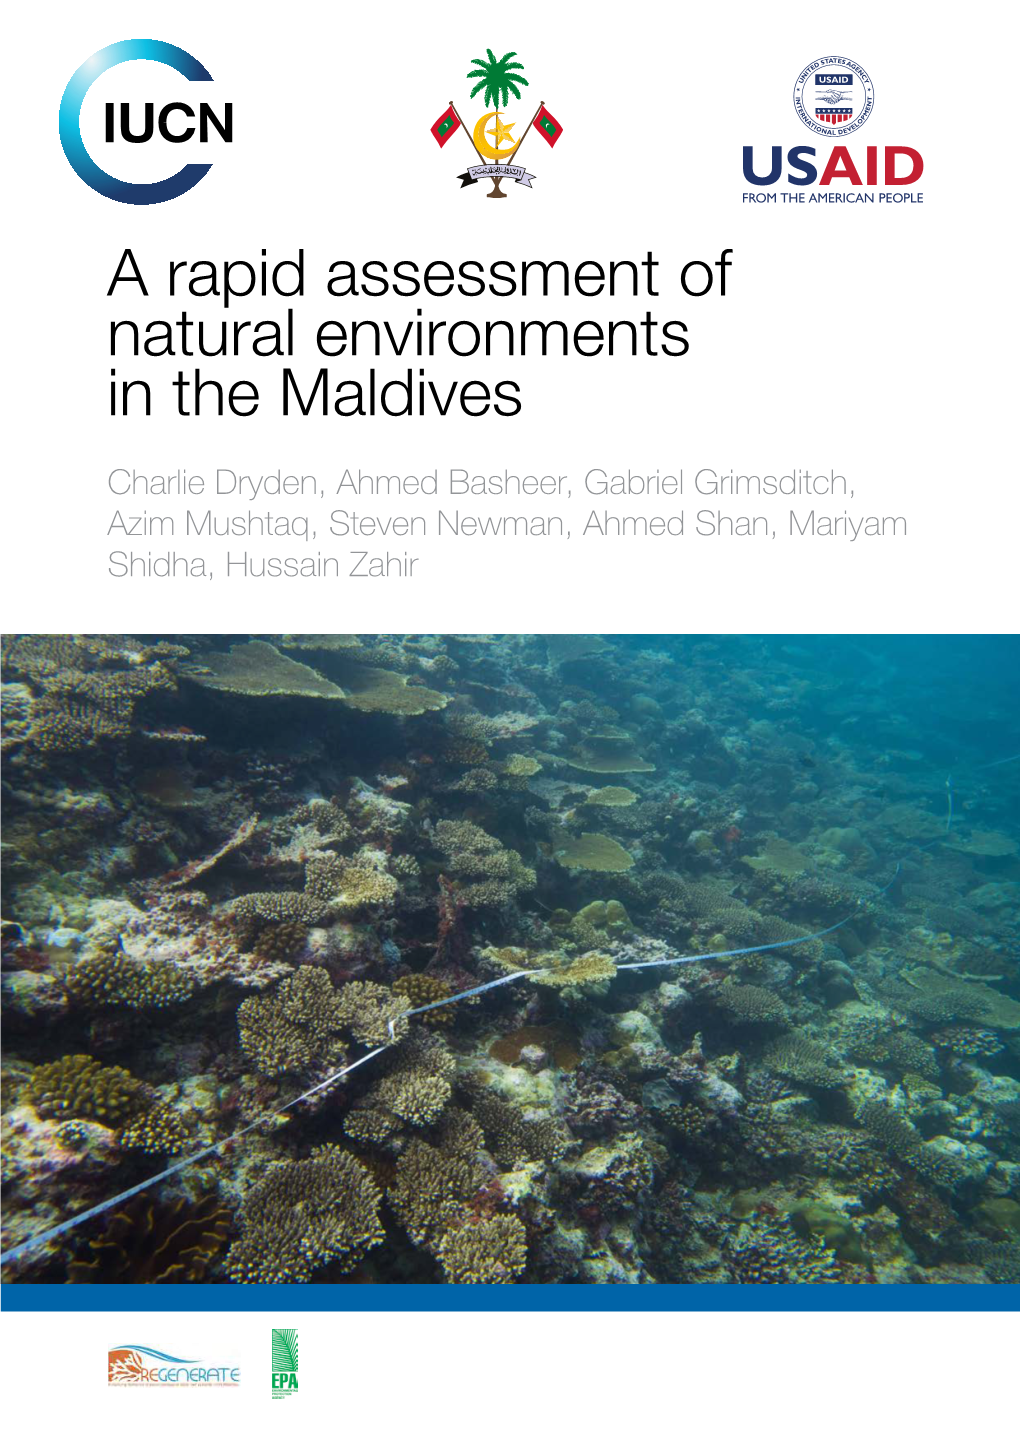 A Rapid Assessment of Natural Environments in the Maldives